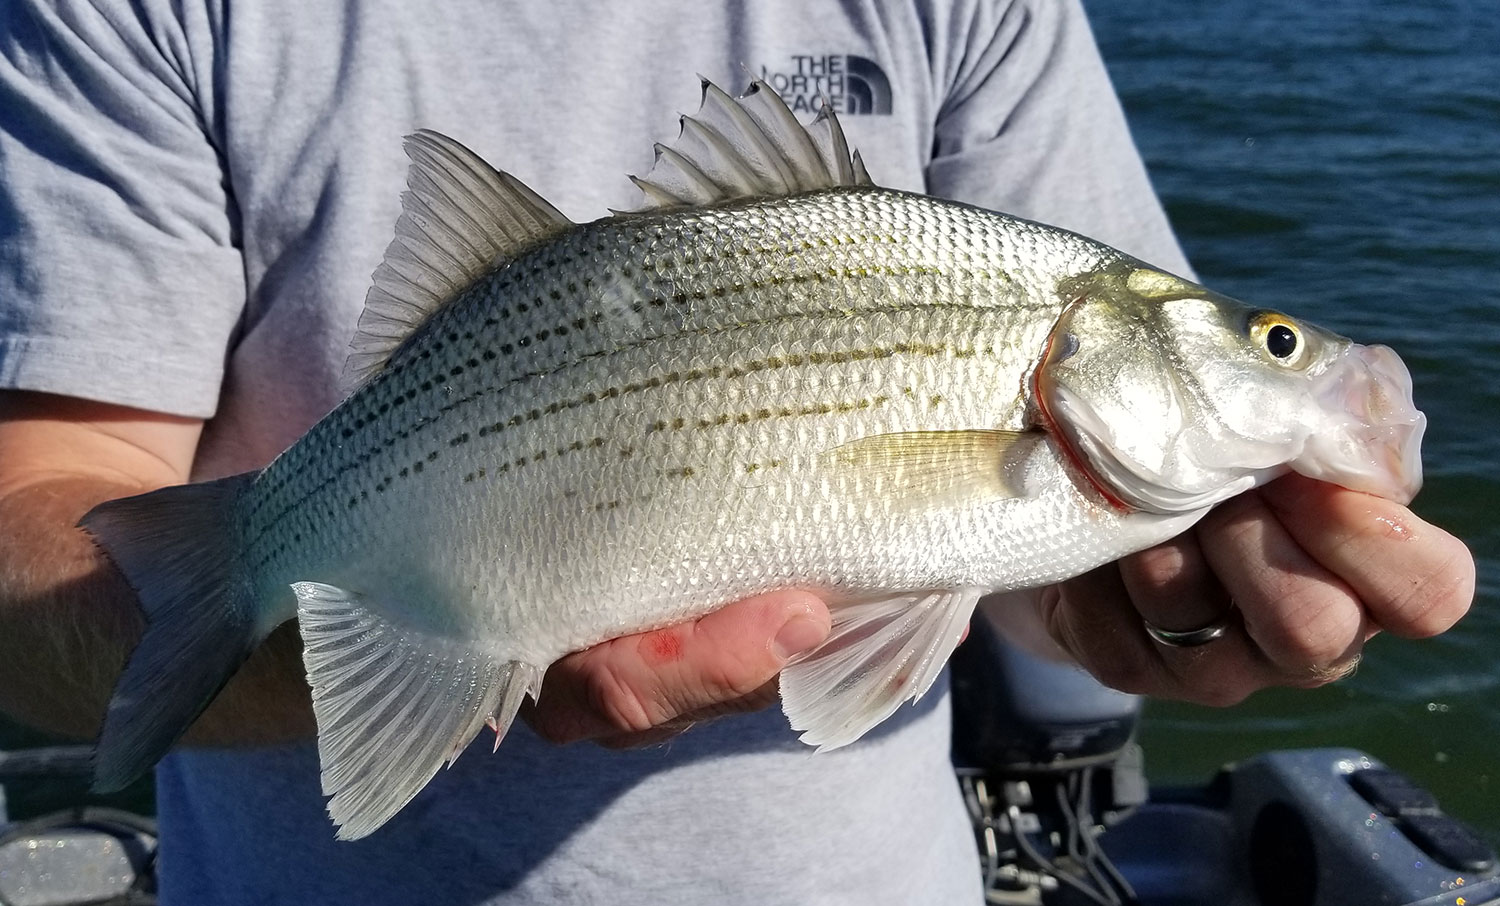 White bass held by angler